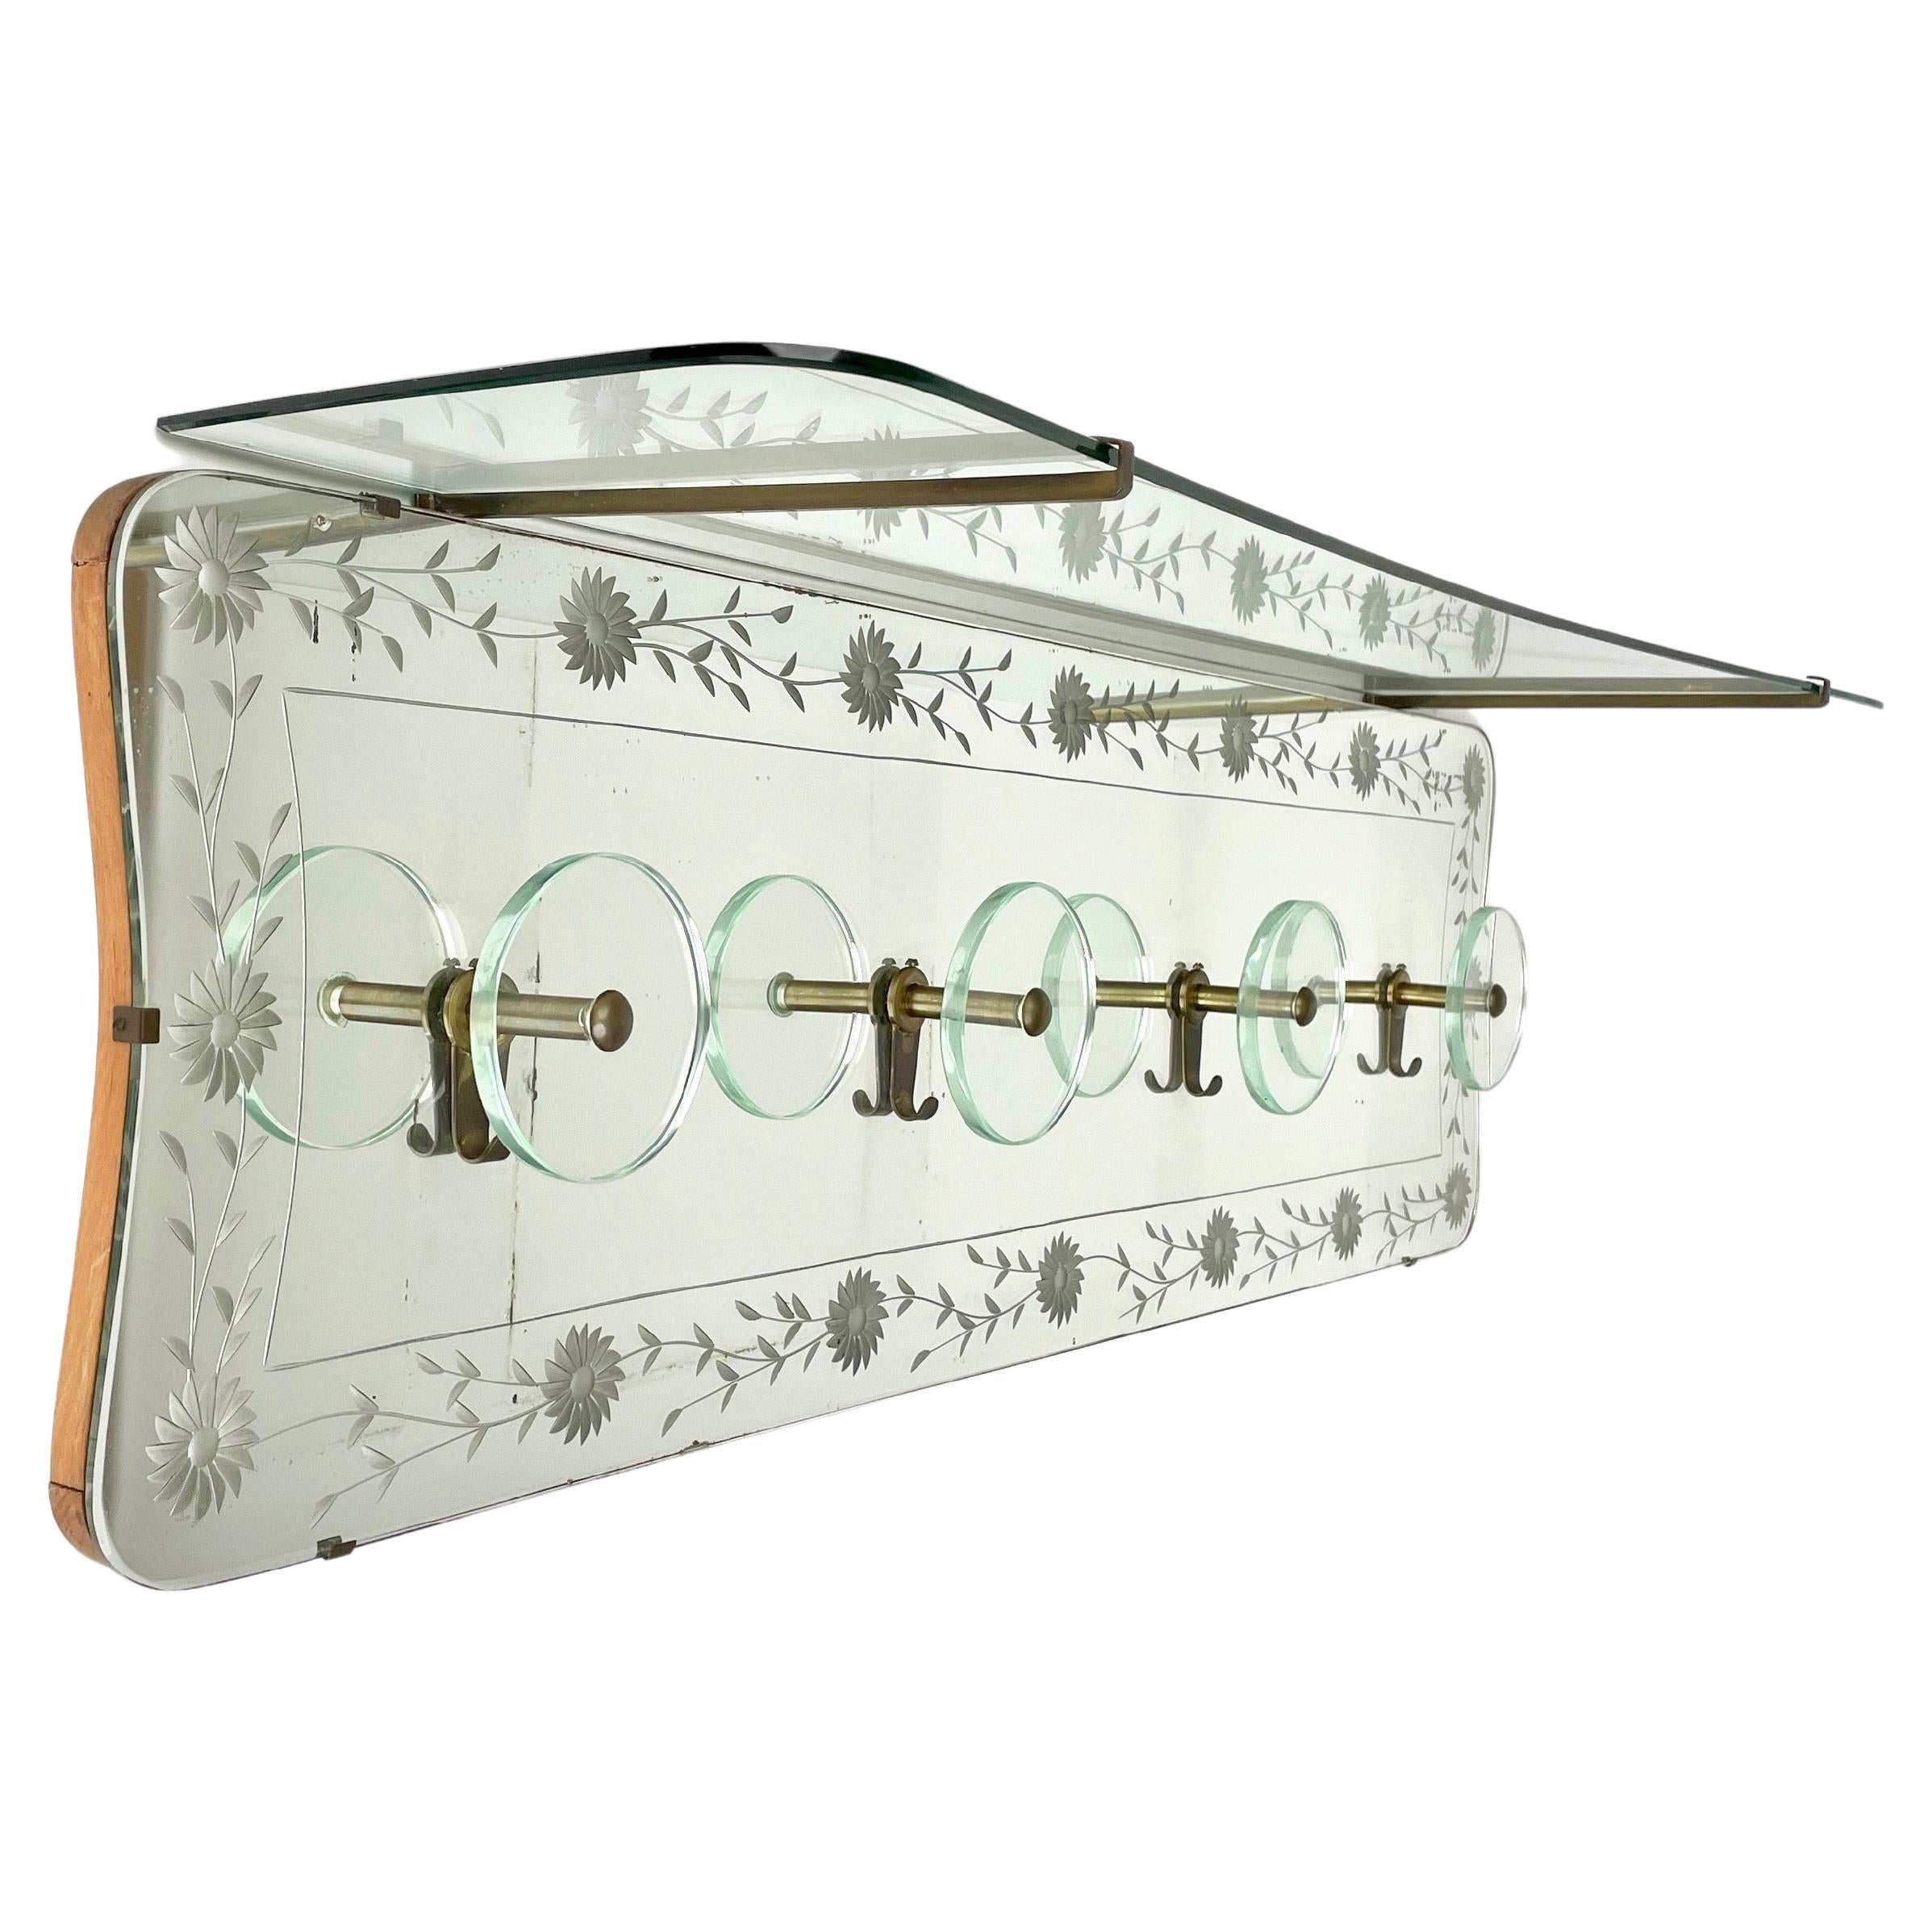 Coat Rack Hanger Shelf in Mirror, Brass and Glass by Cristal Art, Italy, 1950s